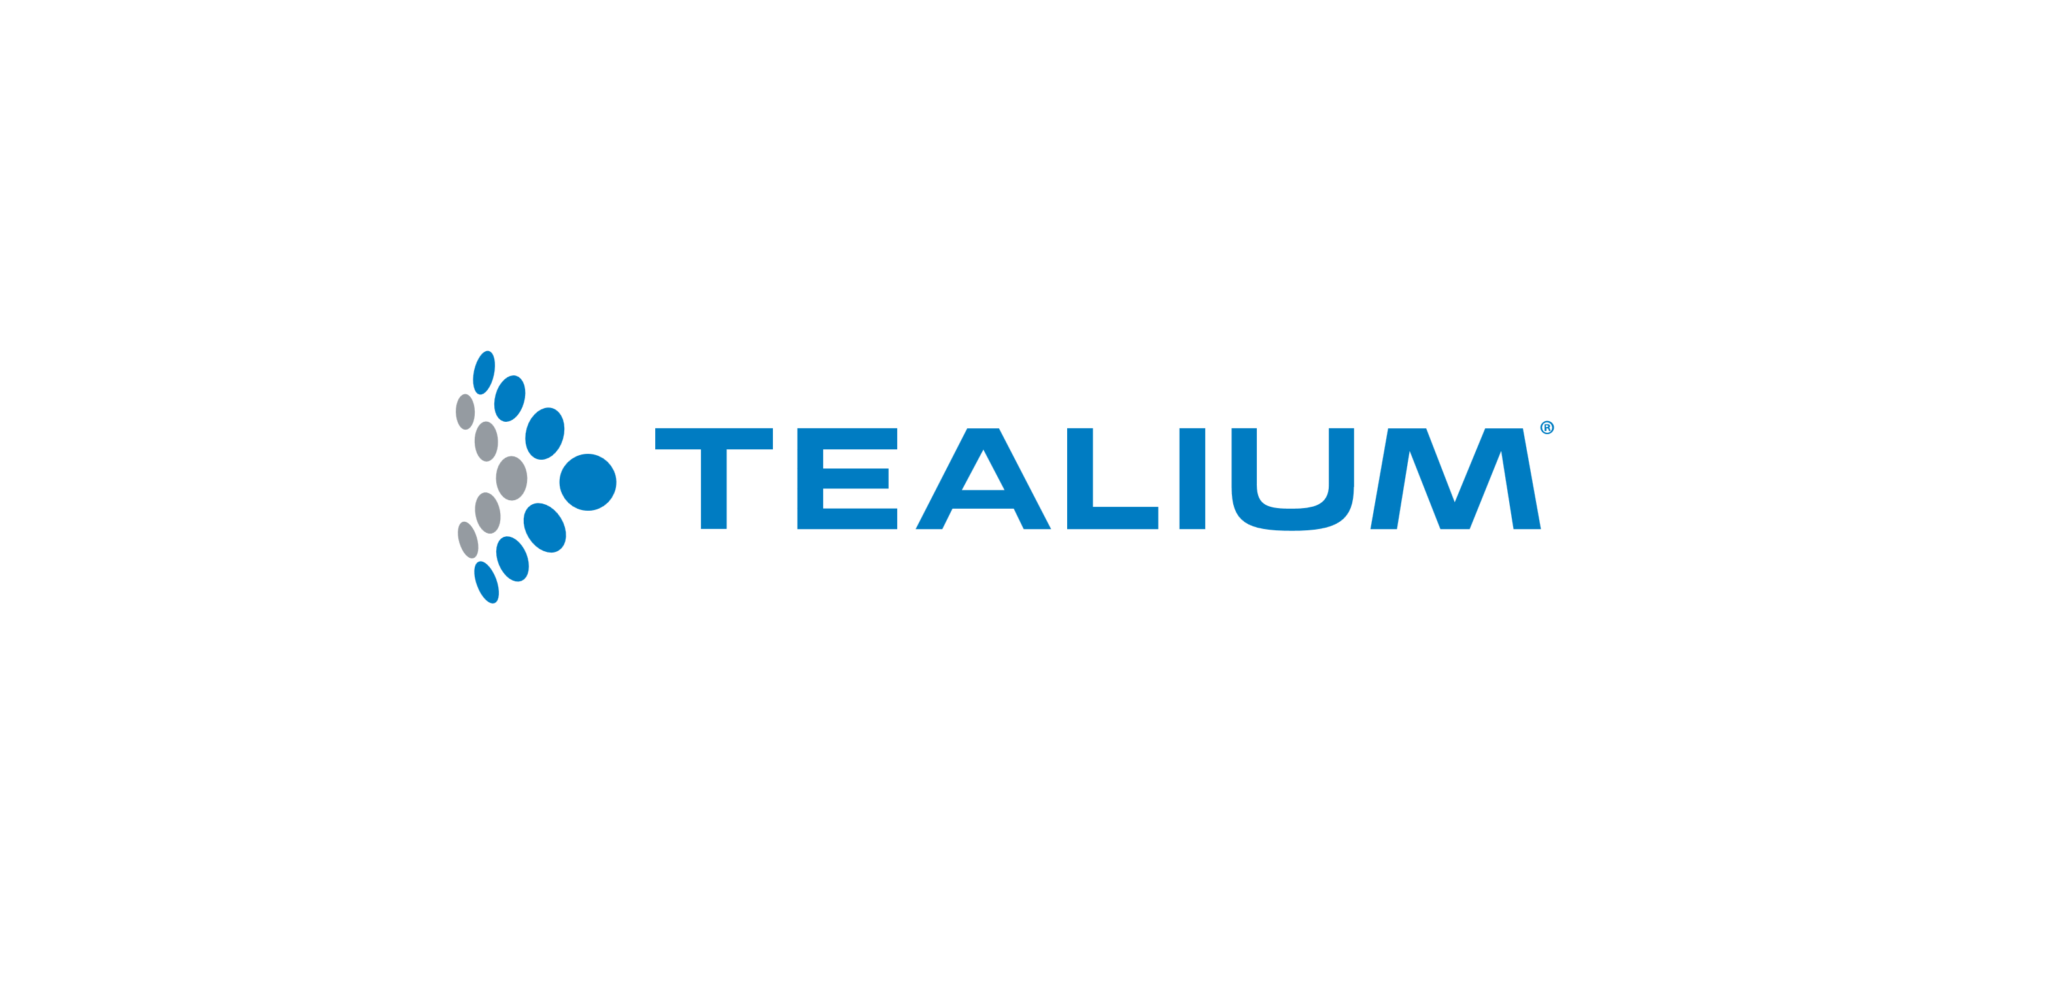 Tealium iQ: What Can It Do? And How Does It Compare?